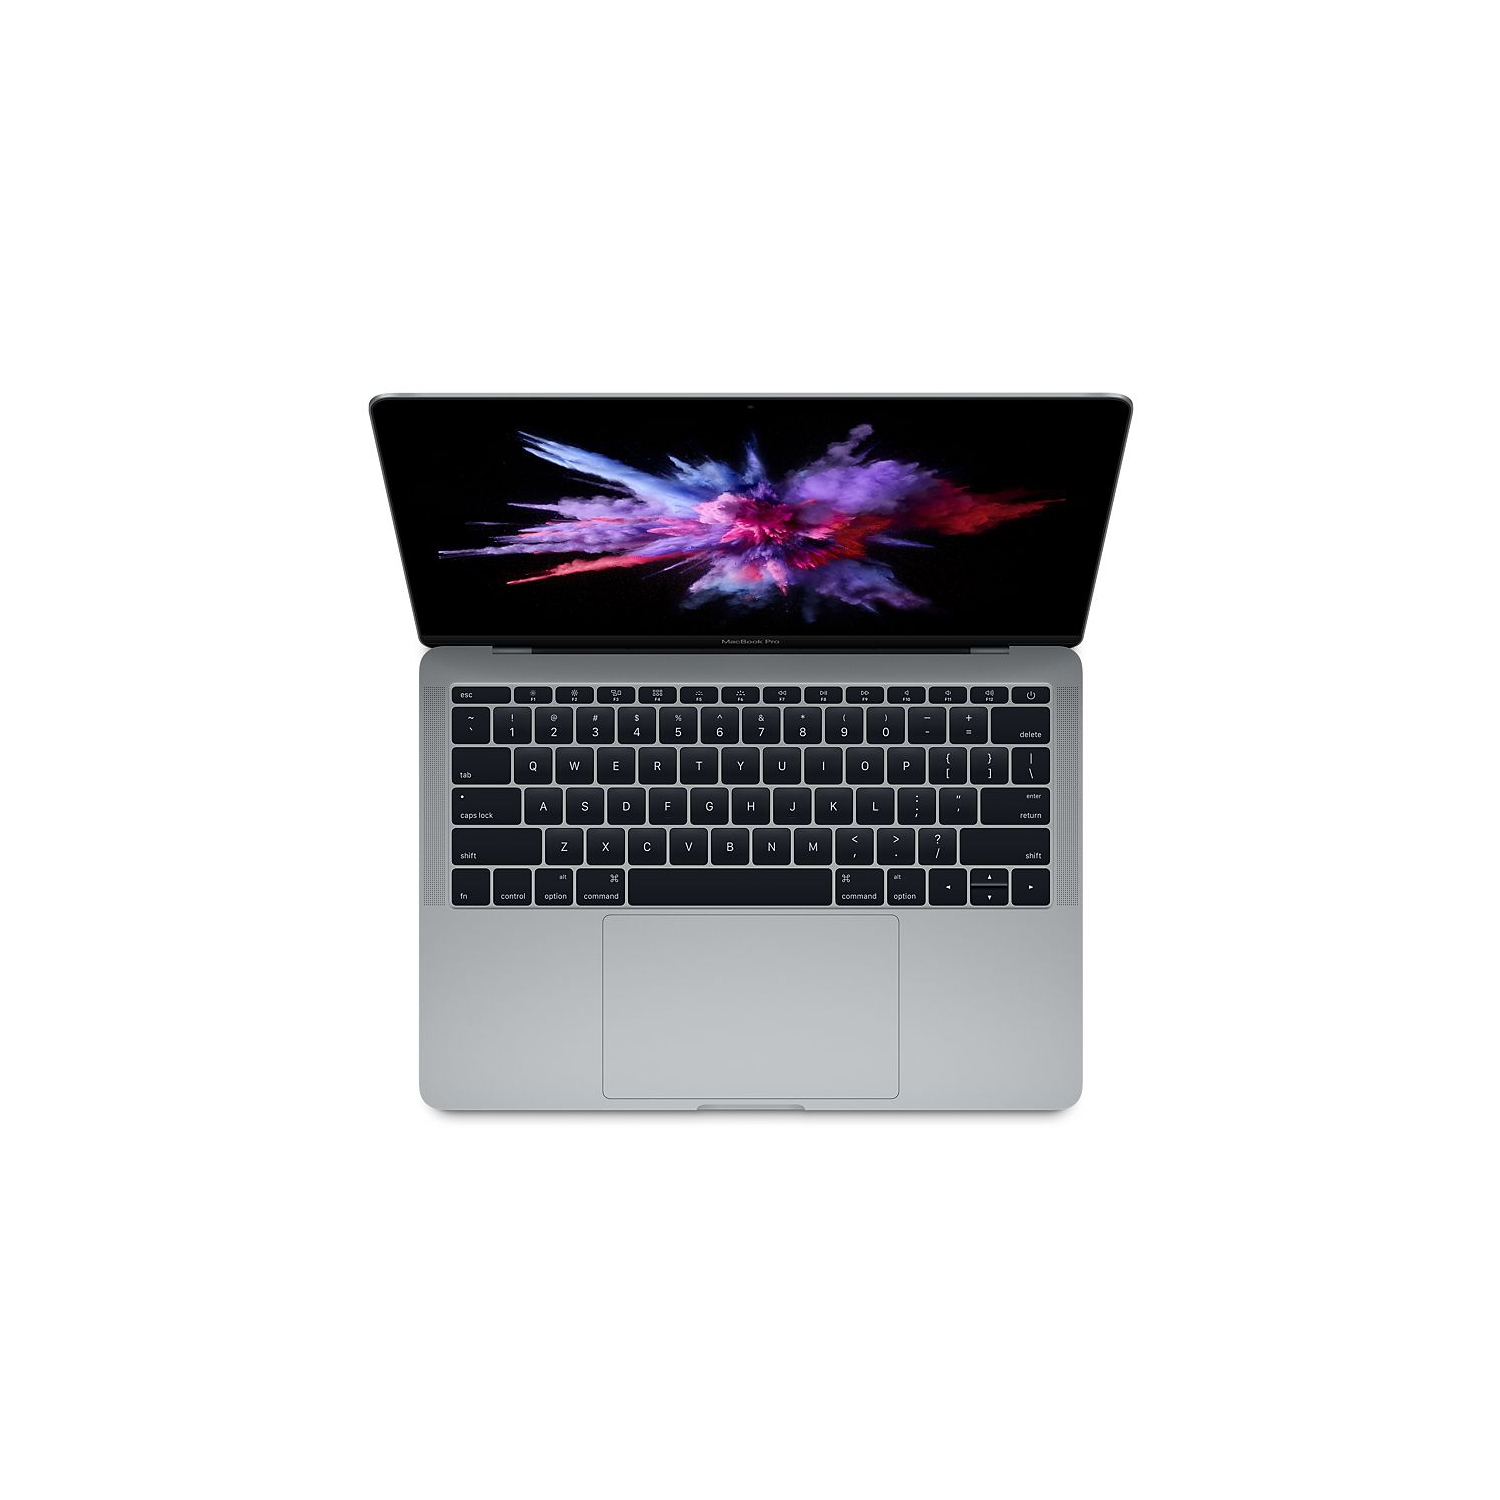 Refurbished (Good) - Apple Macbook Pro 2017 13" Intel core i5, 3.1 Ghz , 8GB RAM, 512GB SSD With touch bar